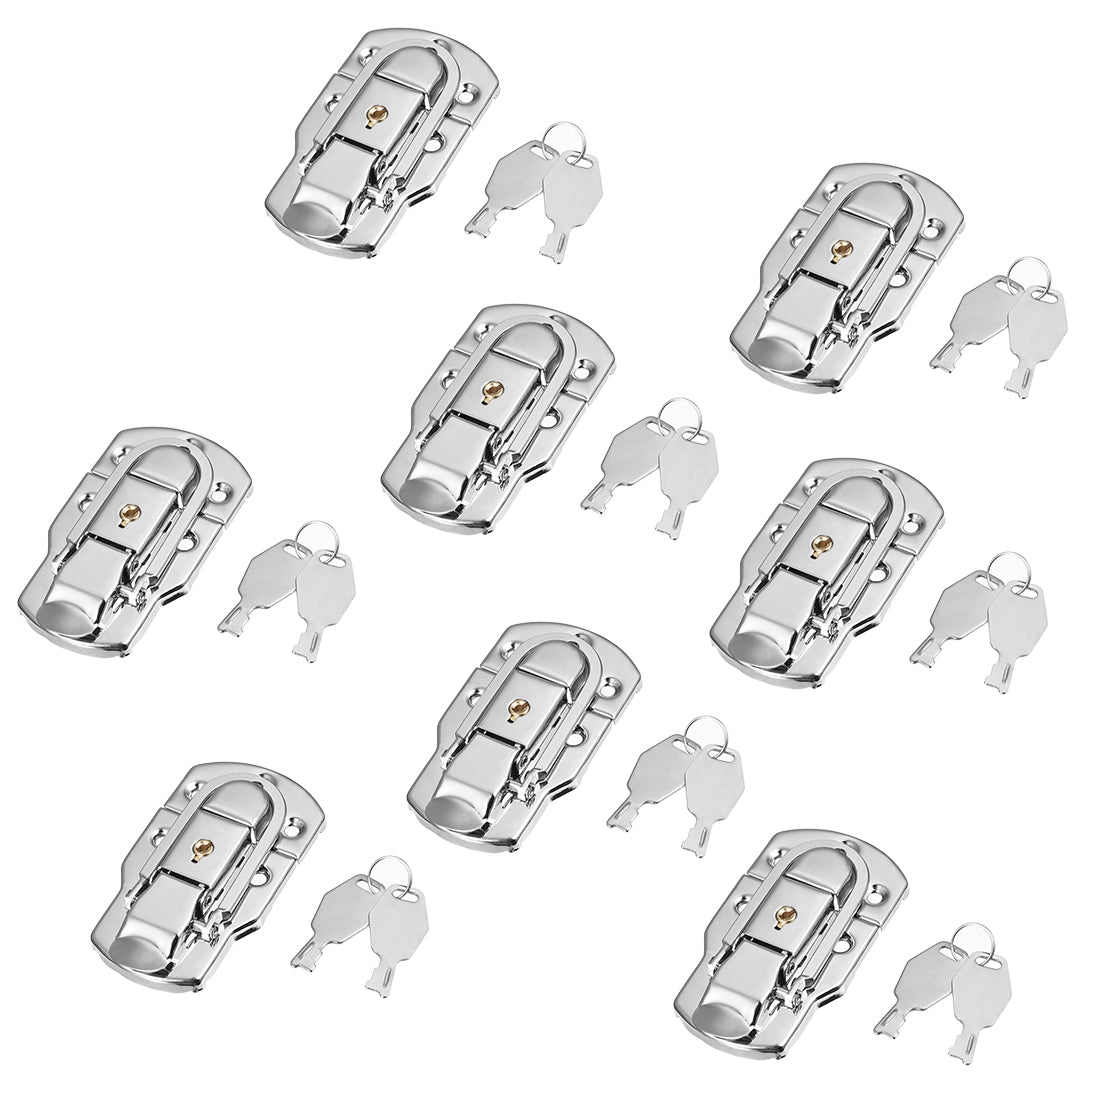 uxcell Uxcell 92mm x 50mm Metal Small Size Suitcase Lock Hasp Catch Latch with Keys 8 Pcs